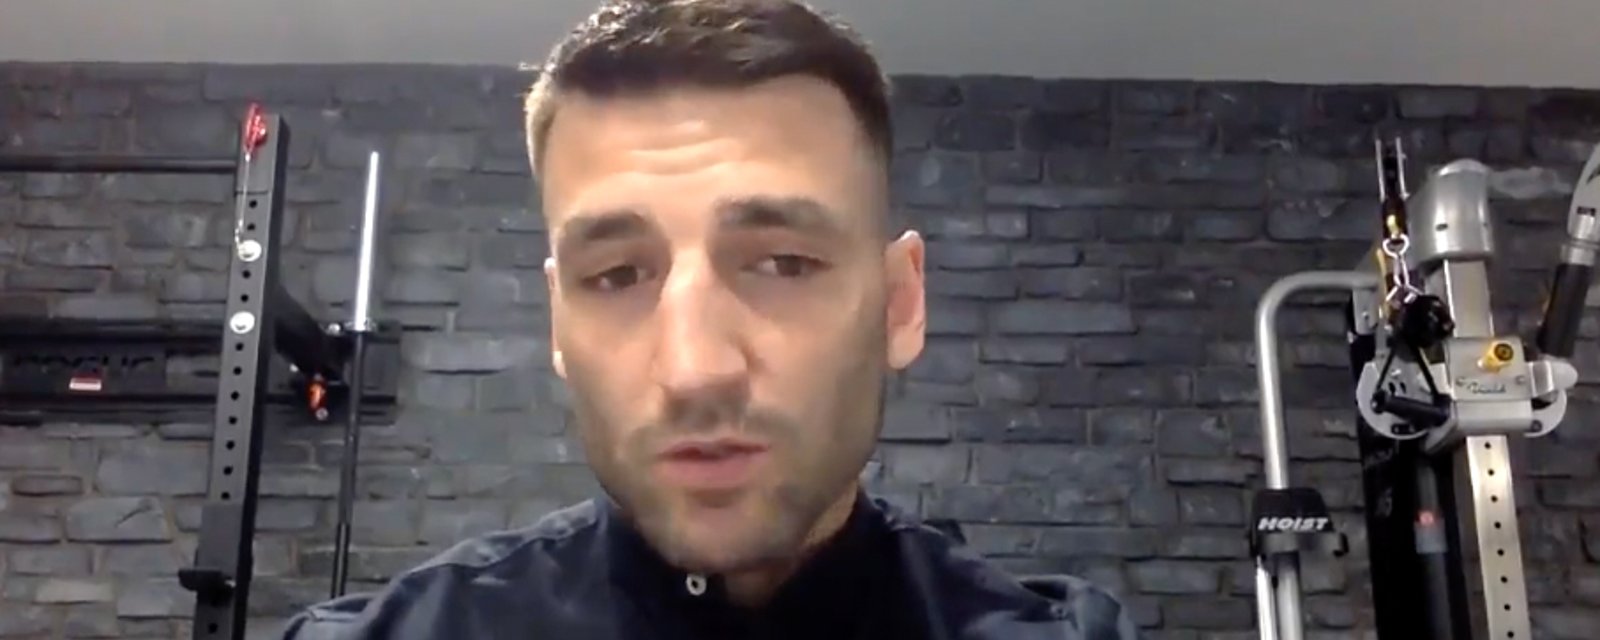 Bergeron refuses to shut up and play as he takes on new initiative despite attacks from trolls 